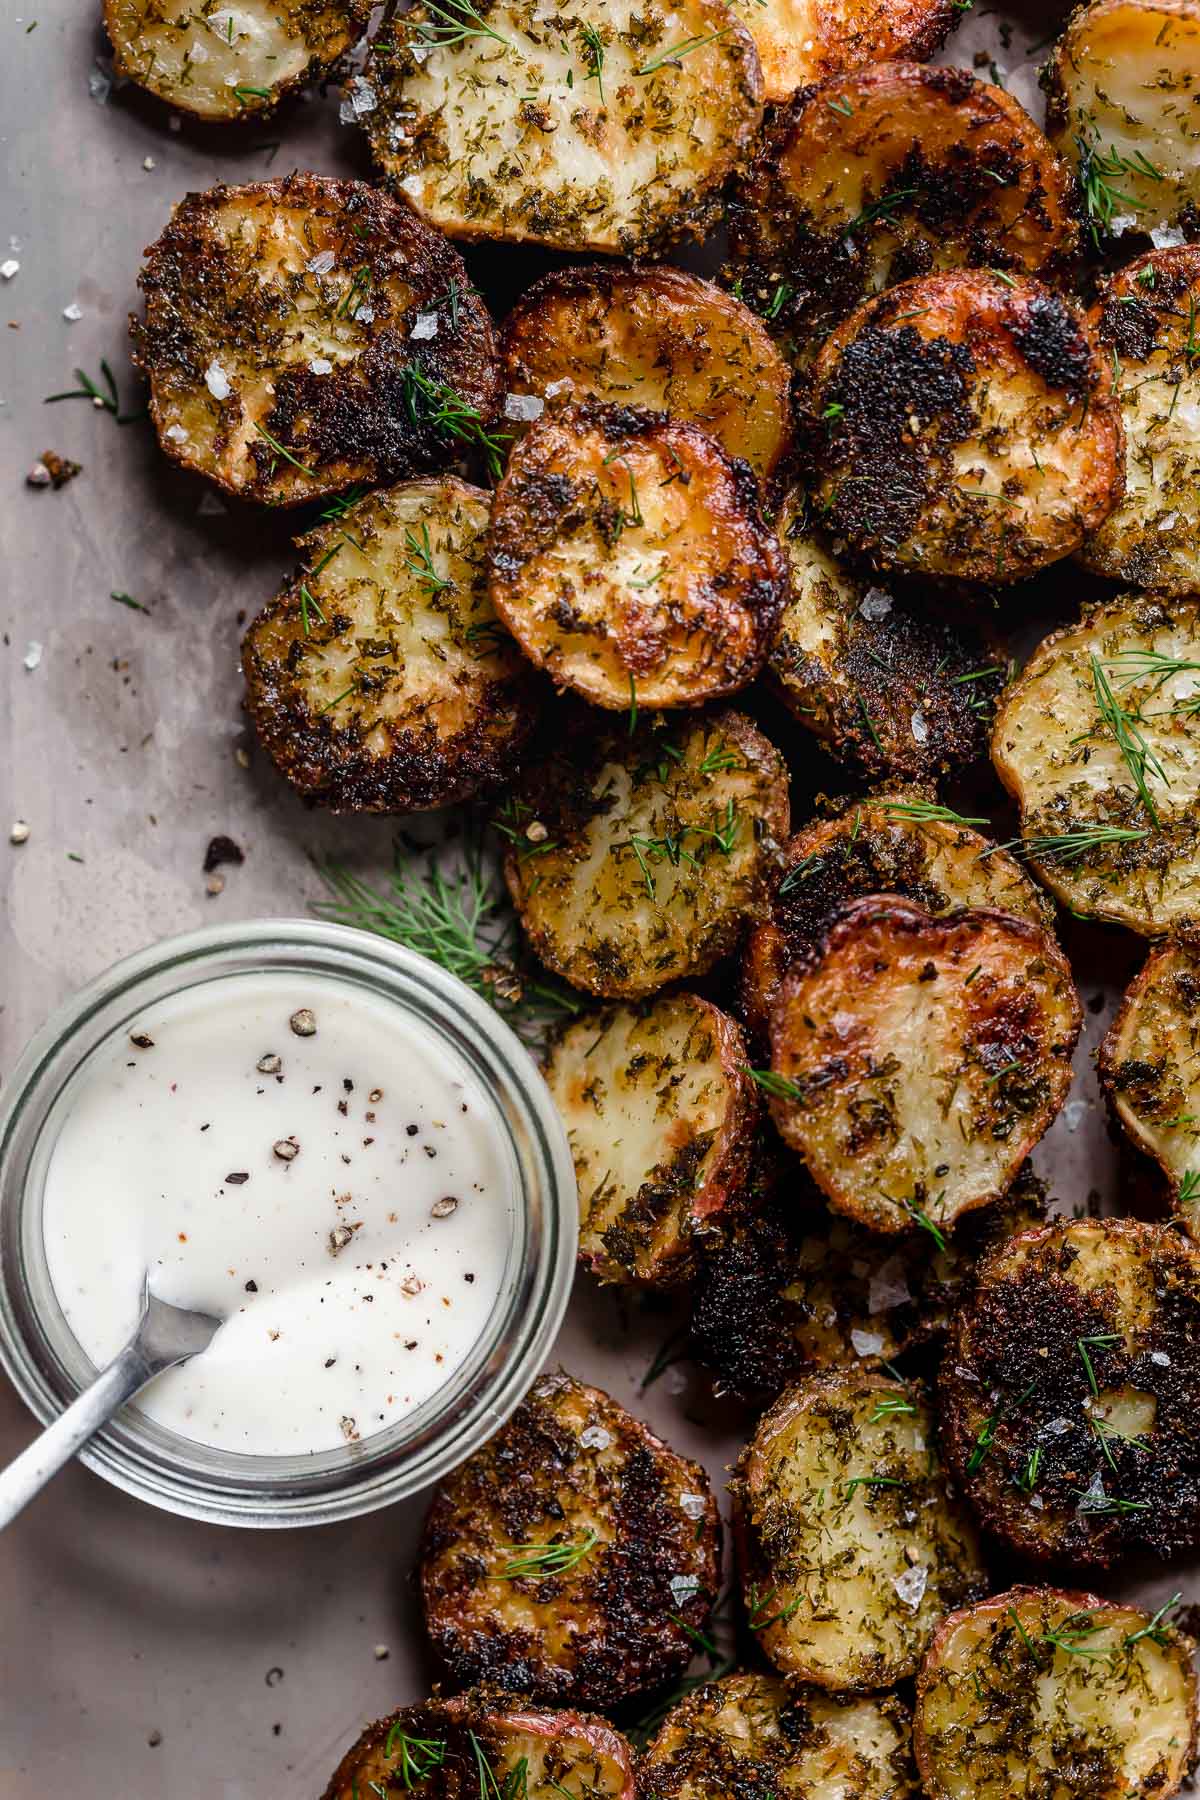 Crispy Garlic Ranch Roasted Potatoes with side of homemade ranch dressing which made the list of our 20 Most Popular Recipes of 2019, coming in at #18. 